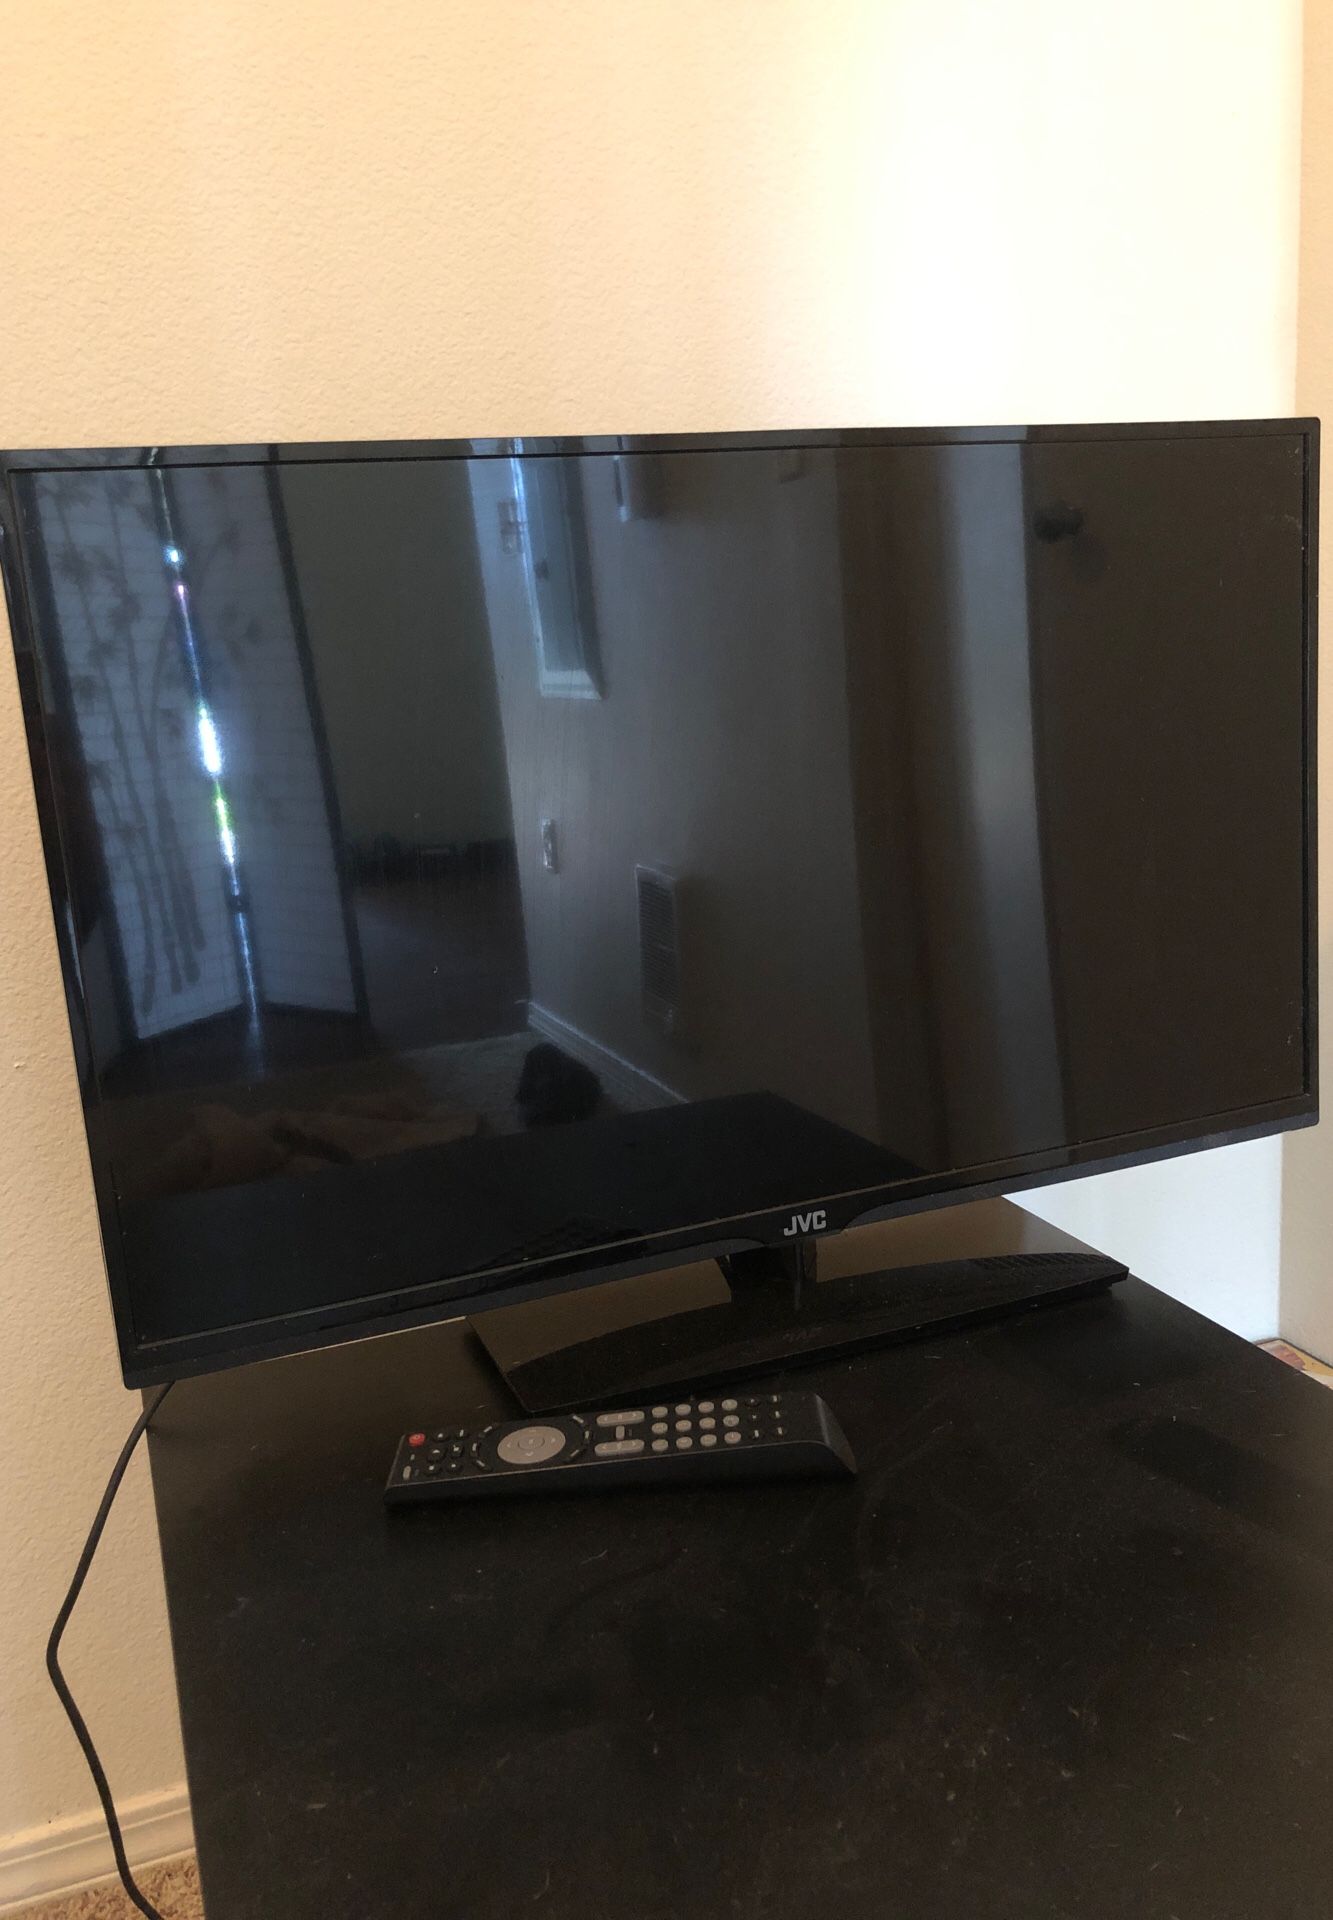 42 inch JVC 1080p television